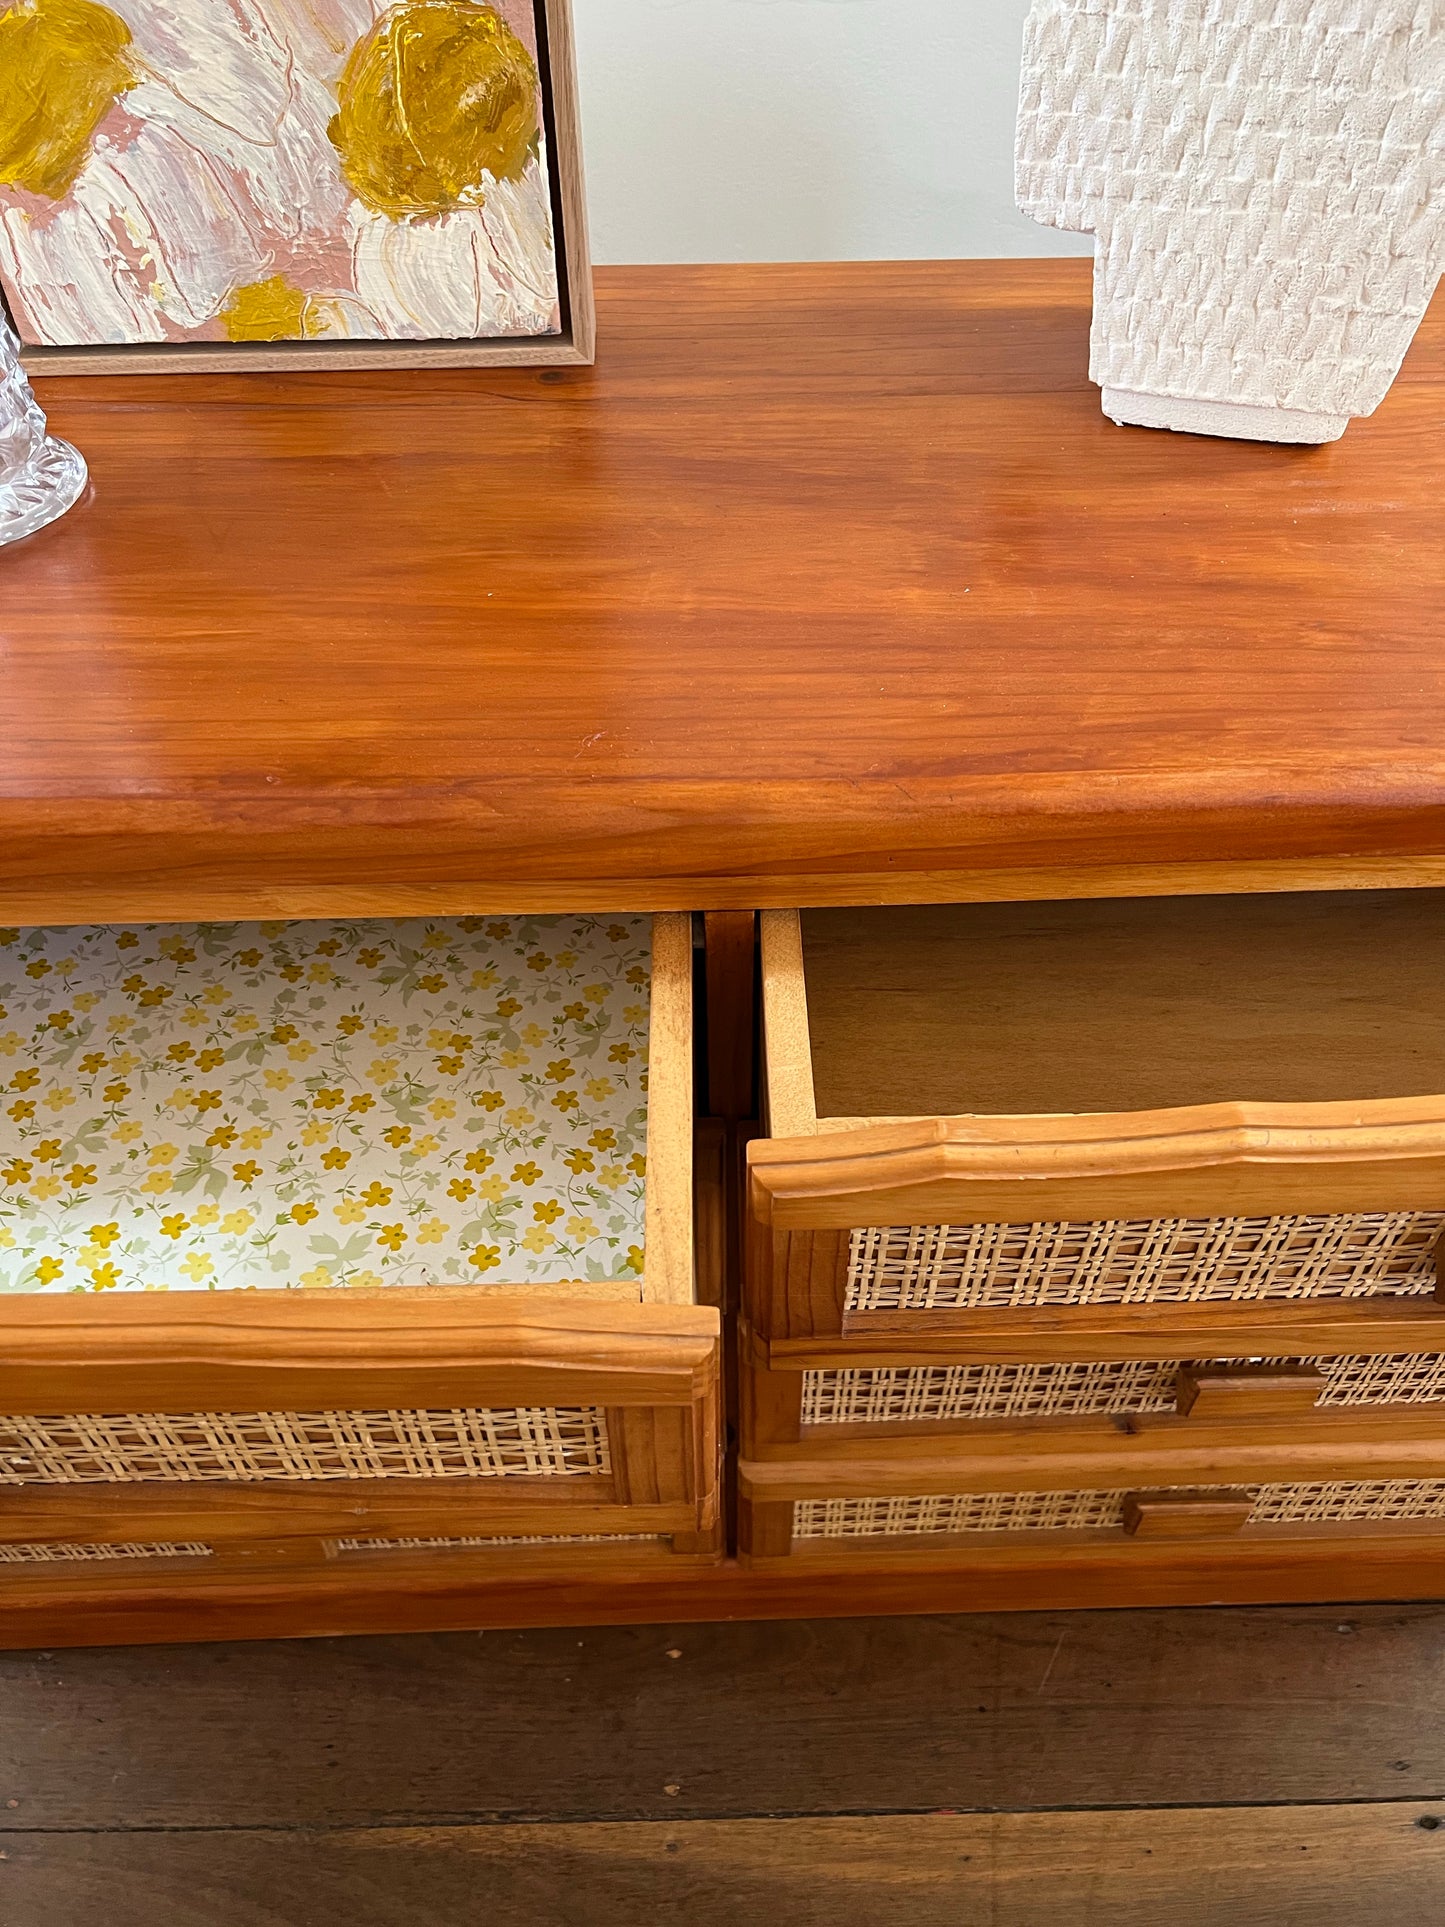 Solid Timber Sideboard / Drawers With Rattan Inserts